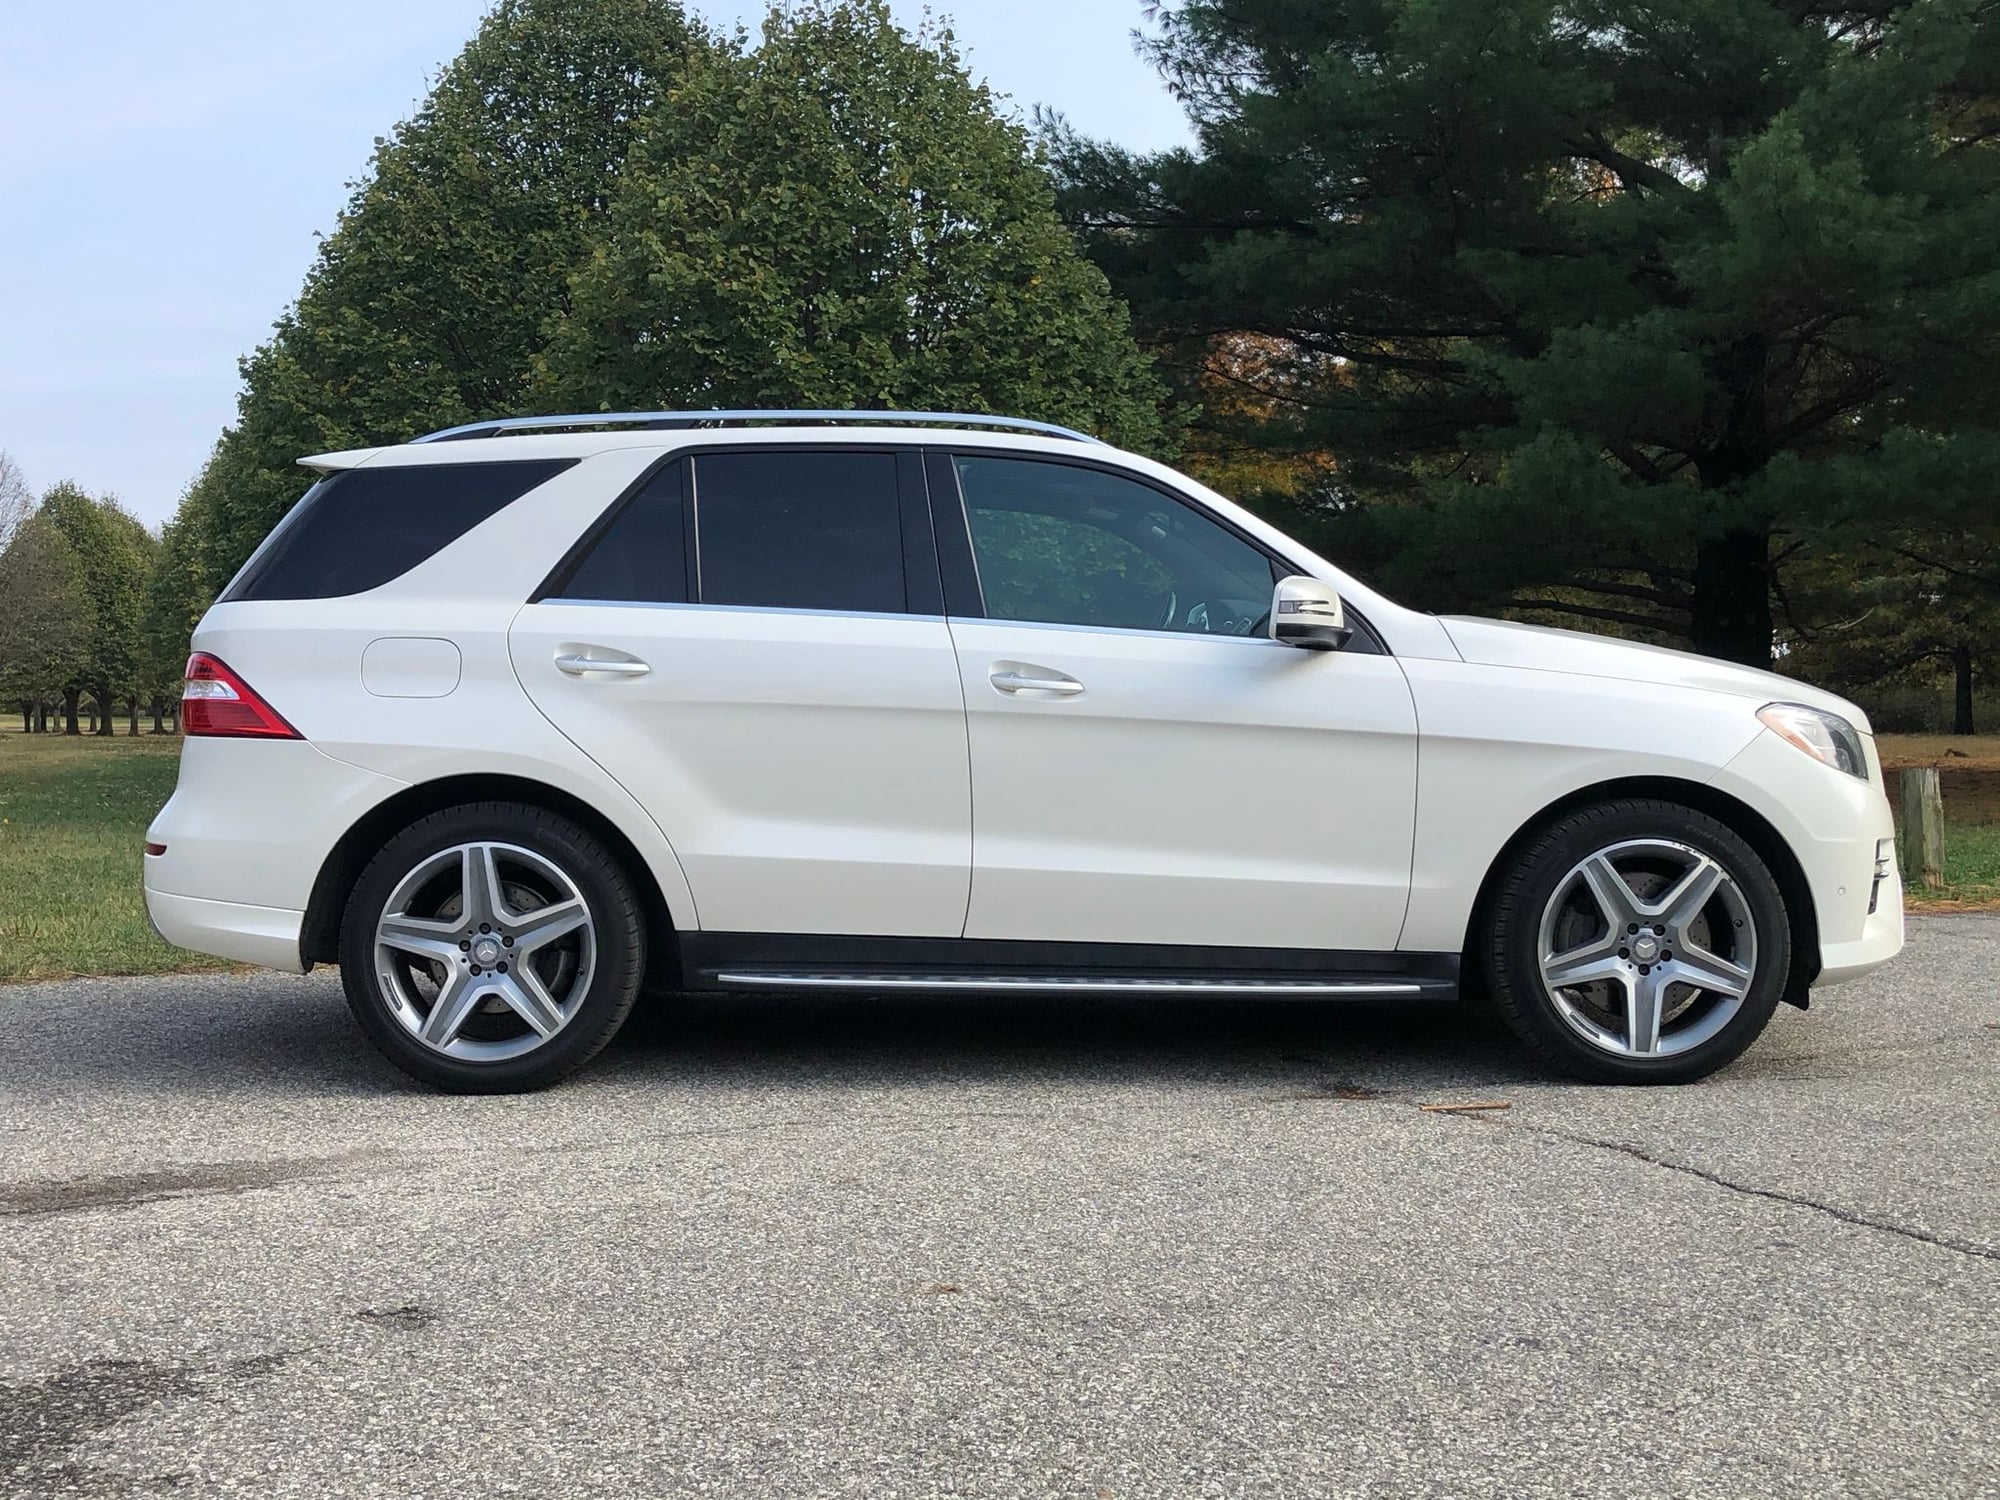 2013 Mercedes-Benz ML550 - 2013 Mercedes ML550 w/ On-Off Road Package - Used - VIN 4JGDA7DB7DA062882 - 179,000 Miles - 8 cyl - AWD - Automatic - SUV - White - Indianapolis, IN 46205, United States